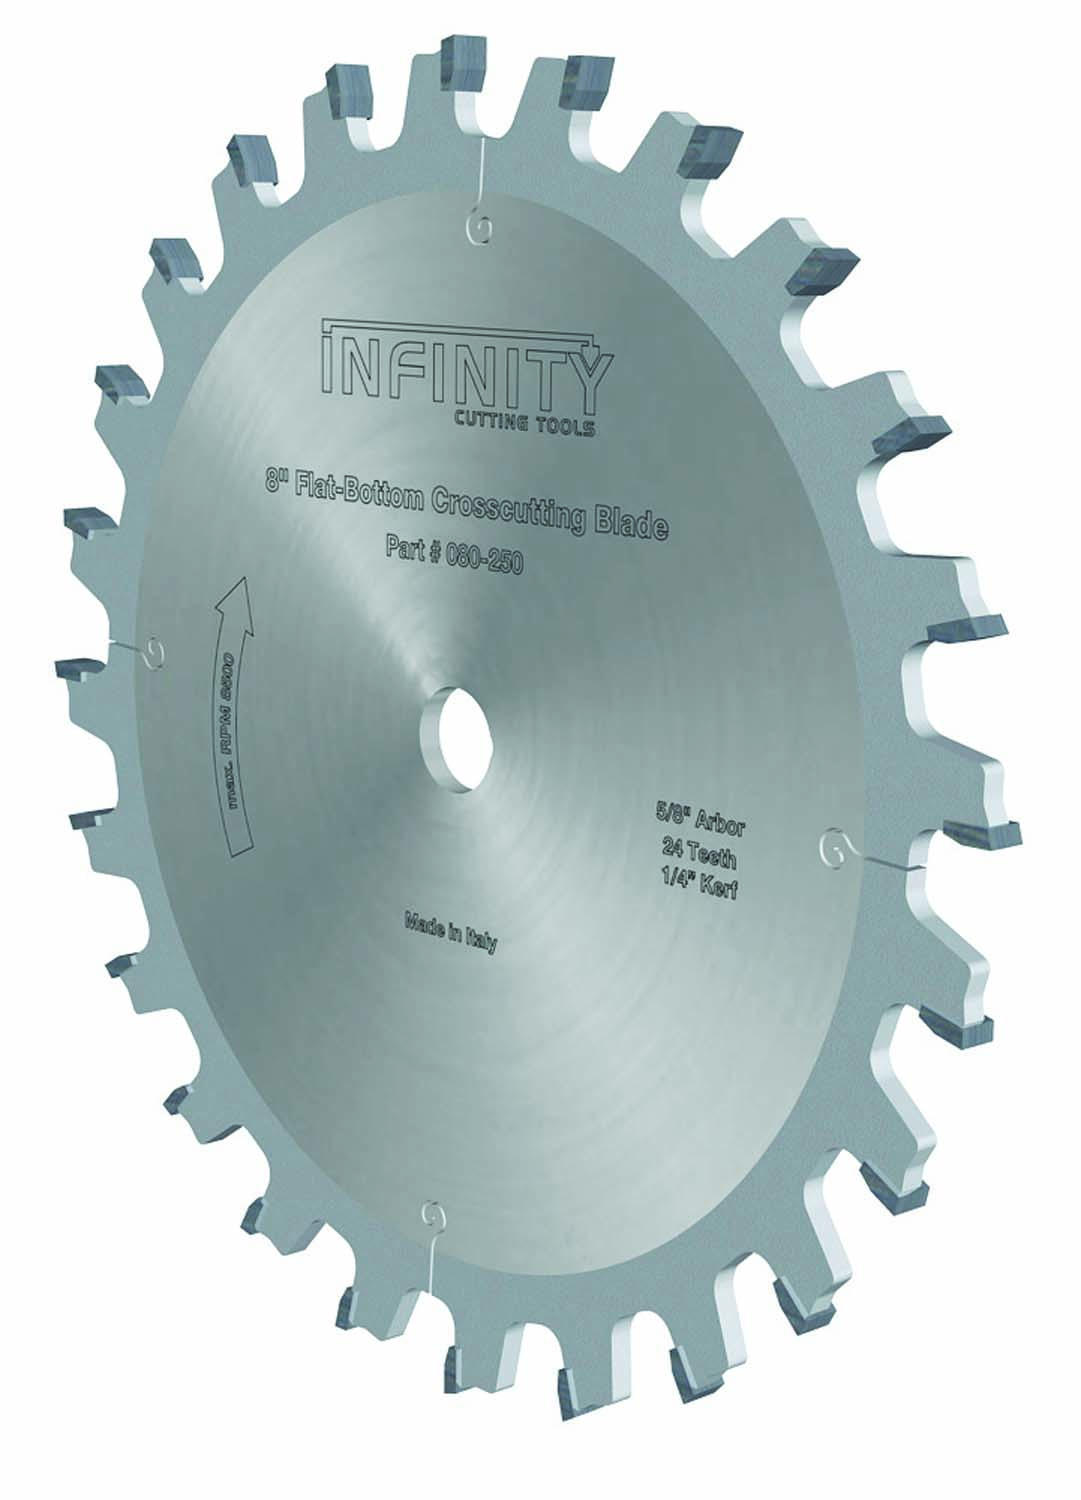 how wide does a table saw blade cut?